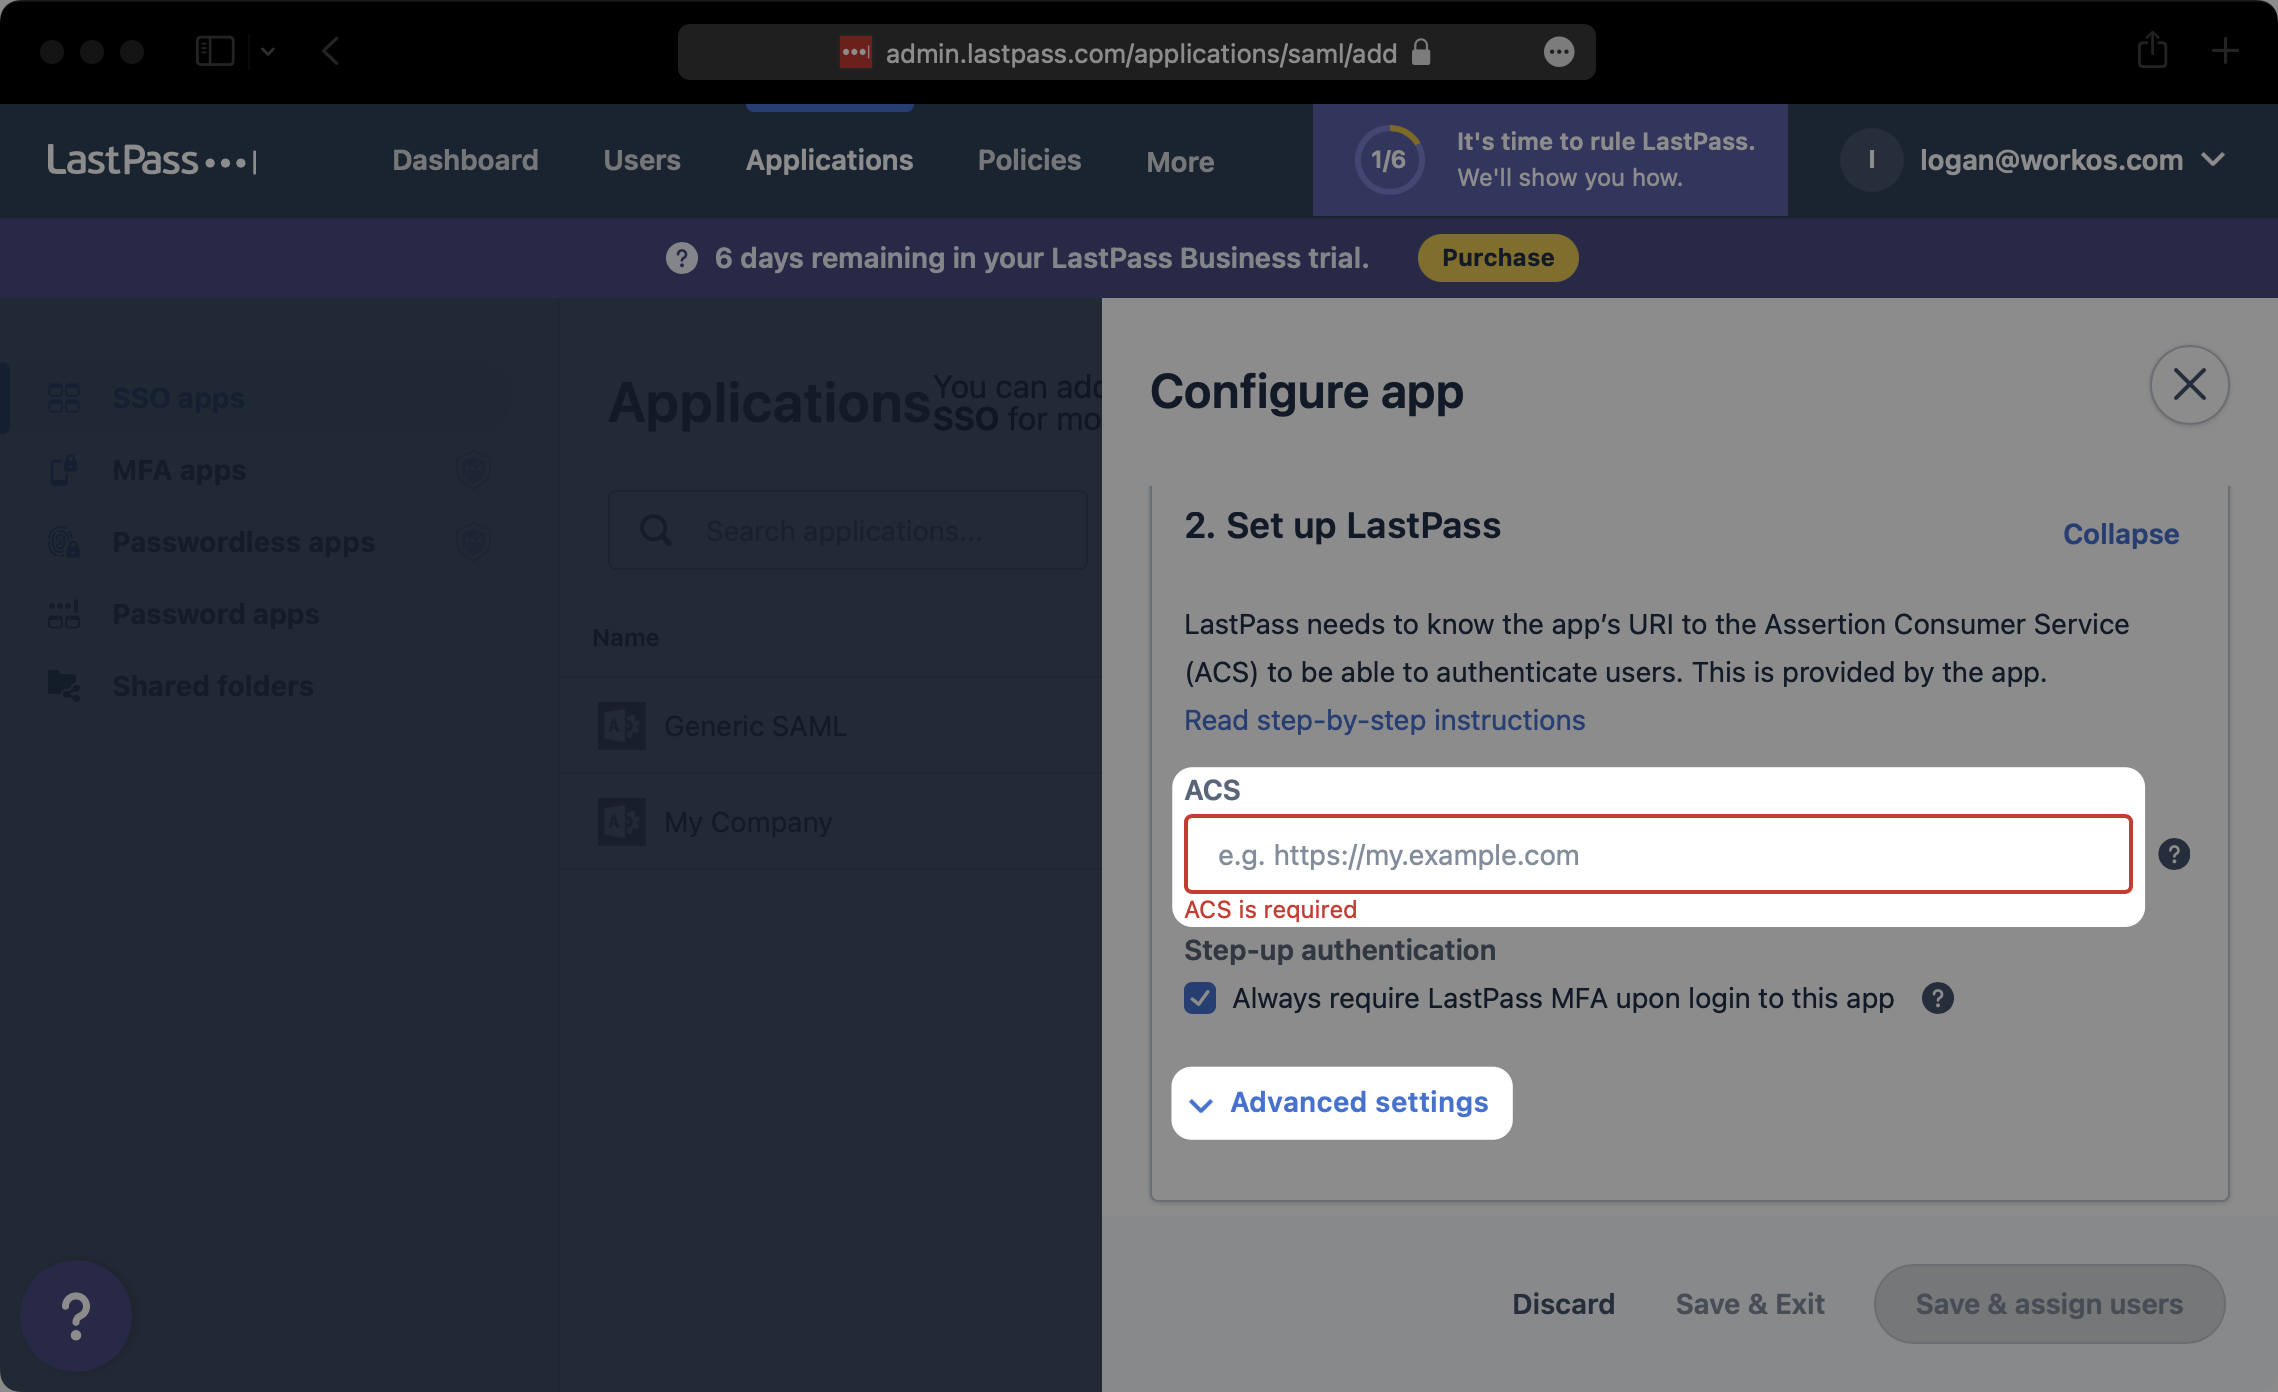 A screenshot showing where to add the ACS URL during the configuration app step in LastPass SAML Settings.